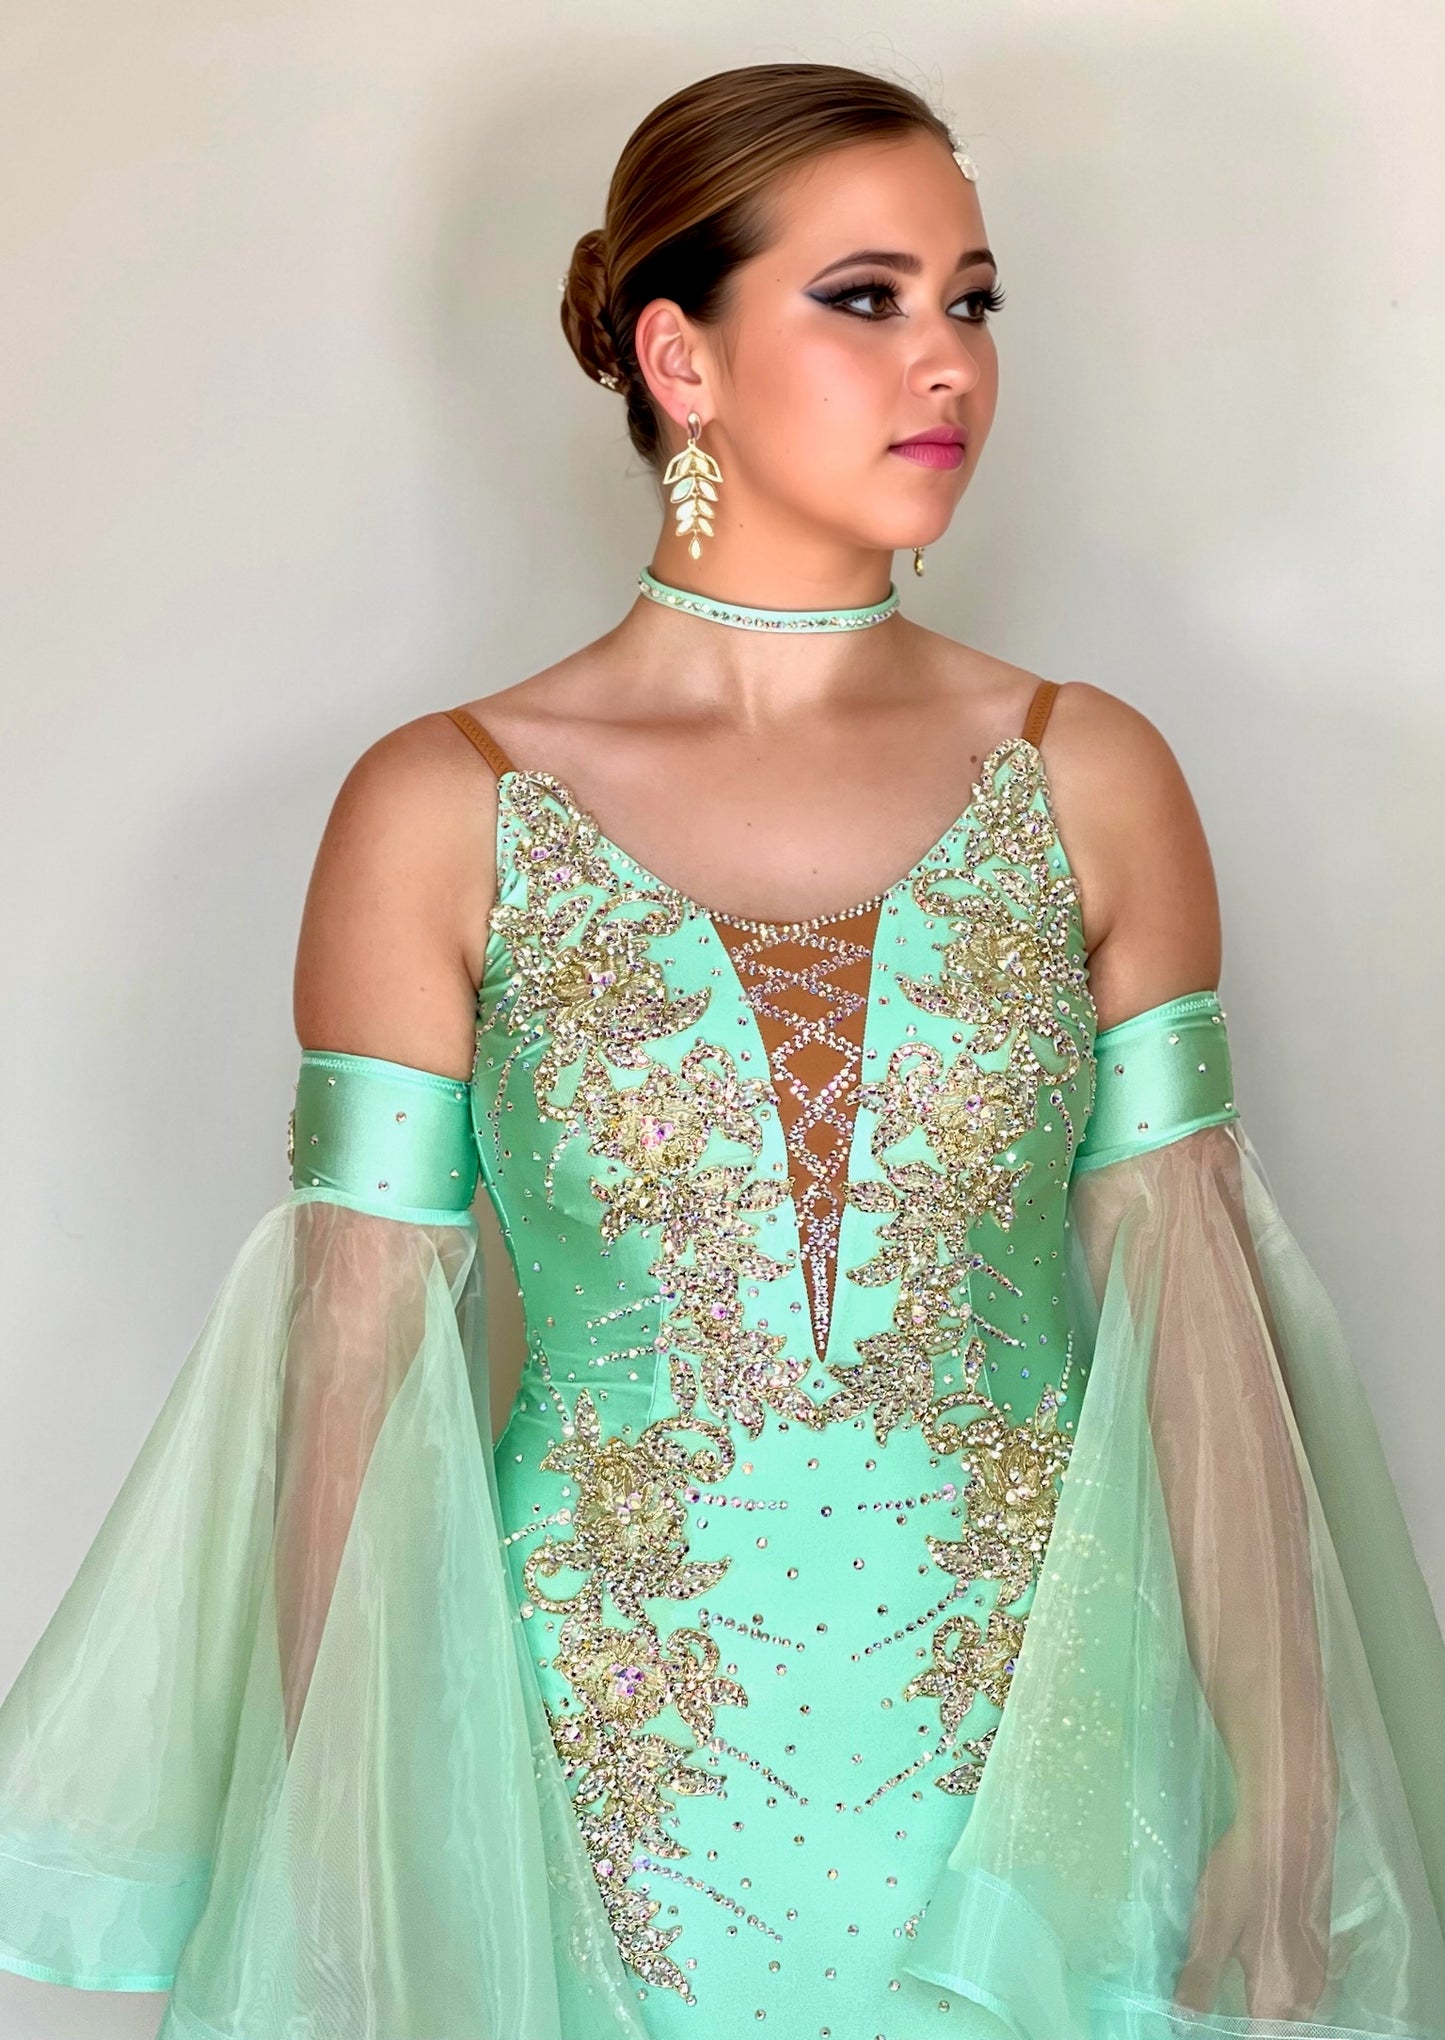 327 mint Green & Gold Ballroom Dress. Decorated with Gold motifs & AB Stones. Comes with separate floaty sleeve cuffs.